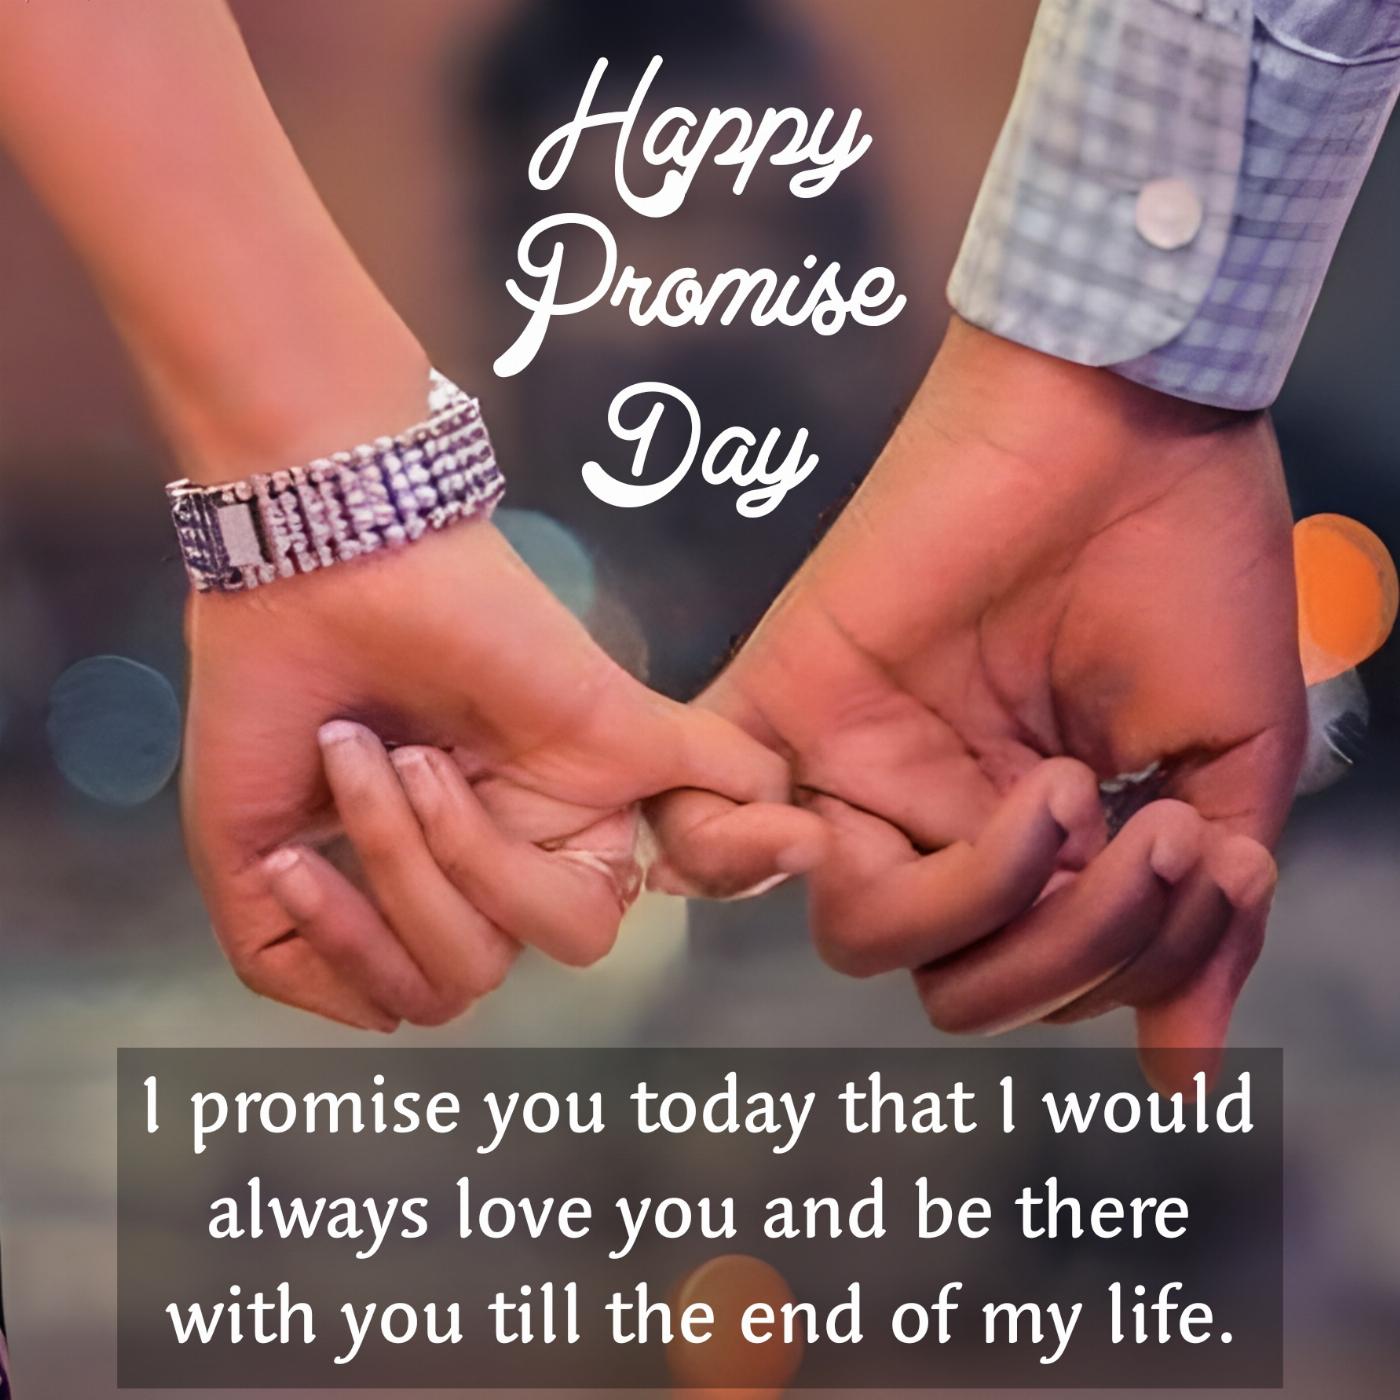 I promise you today that I would always love you